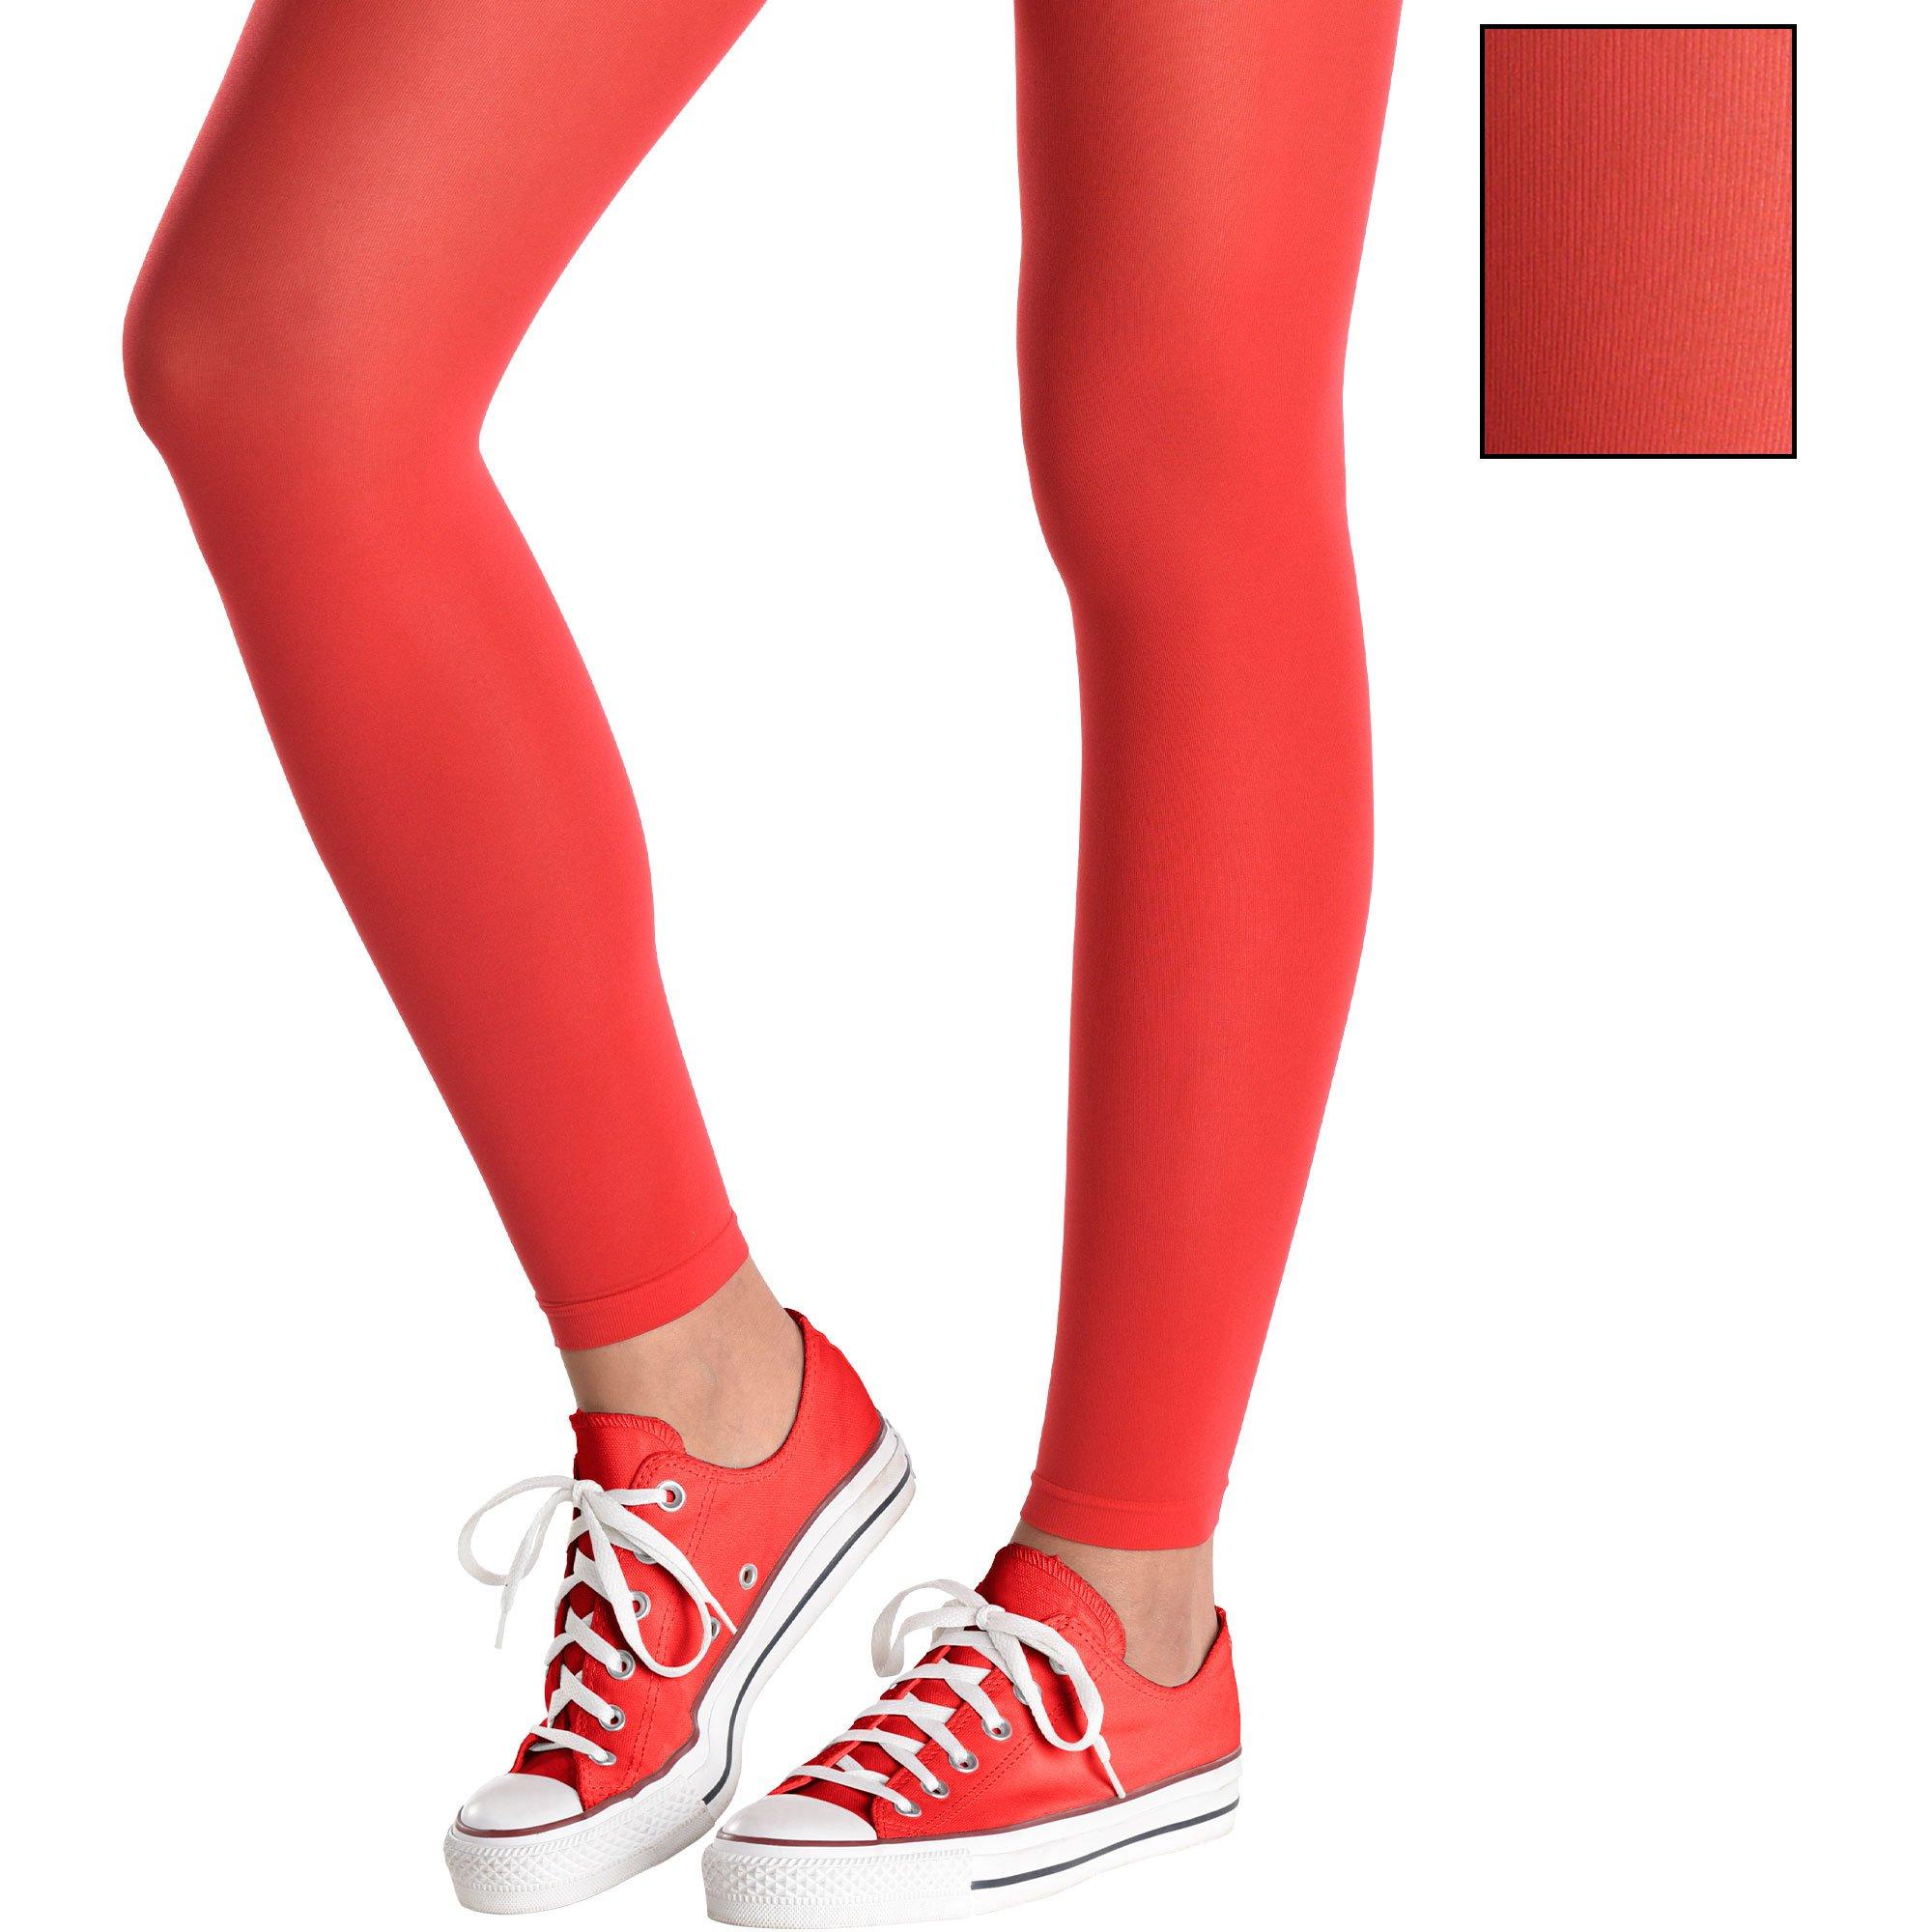 Red Footless Tights